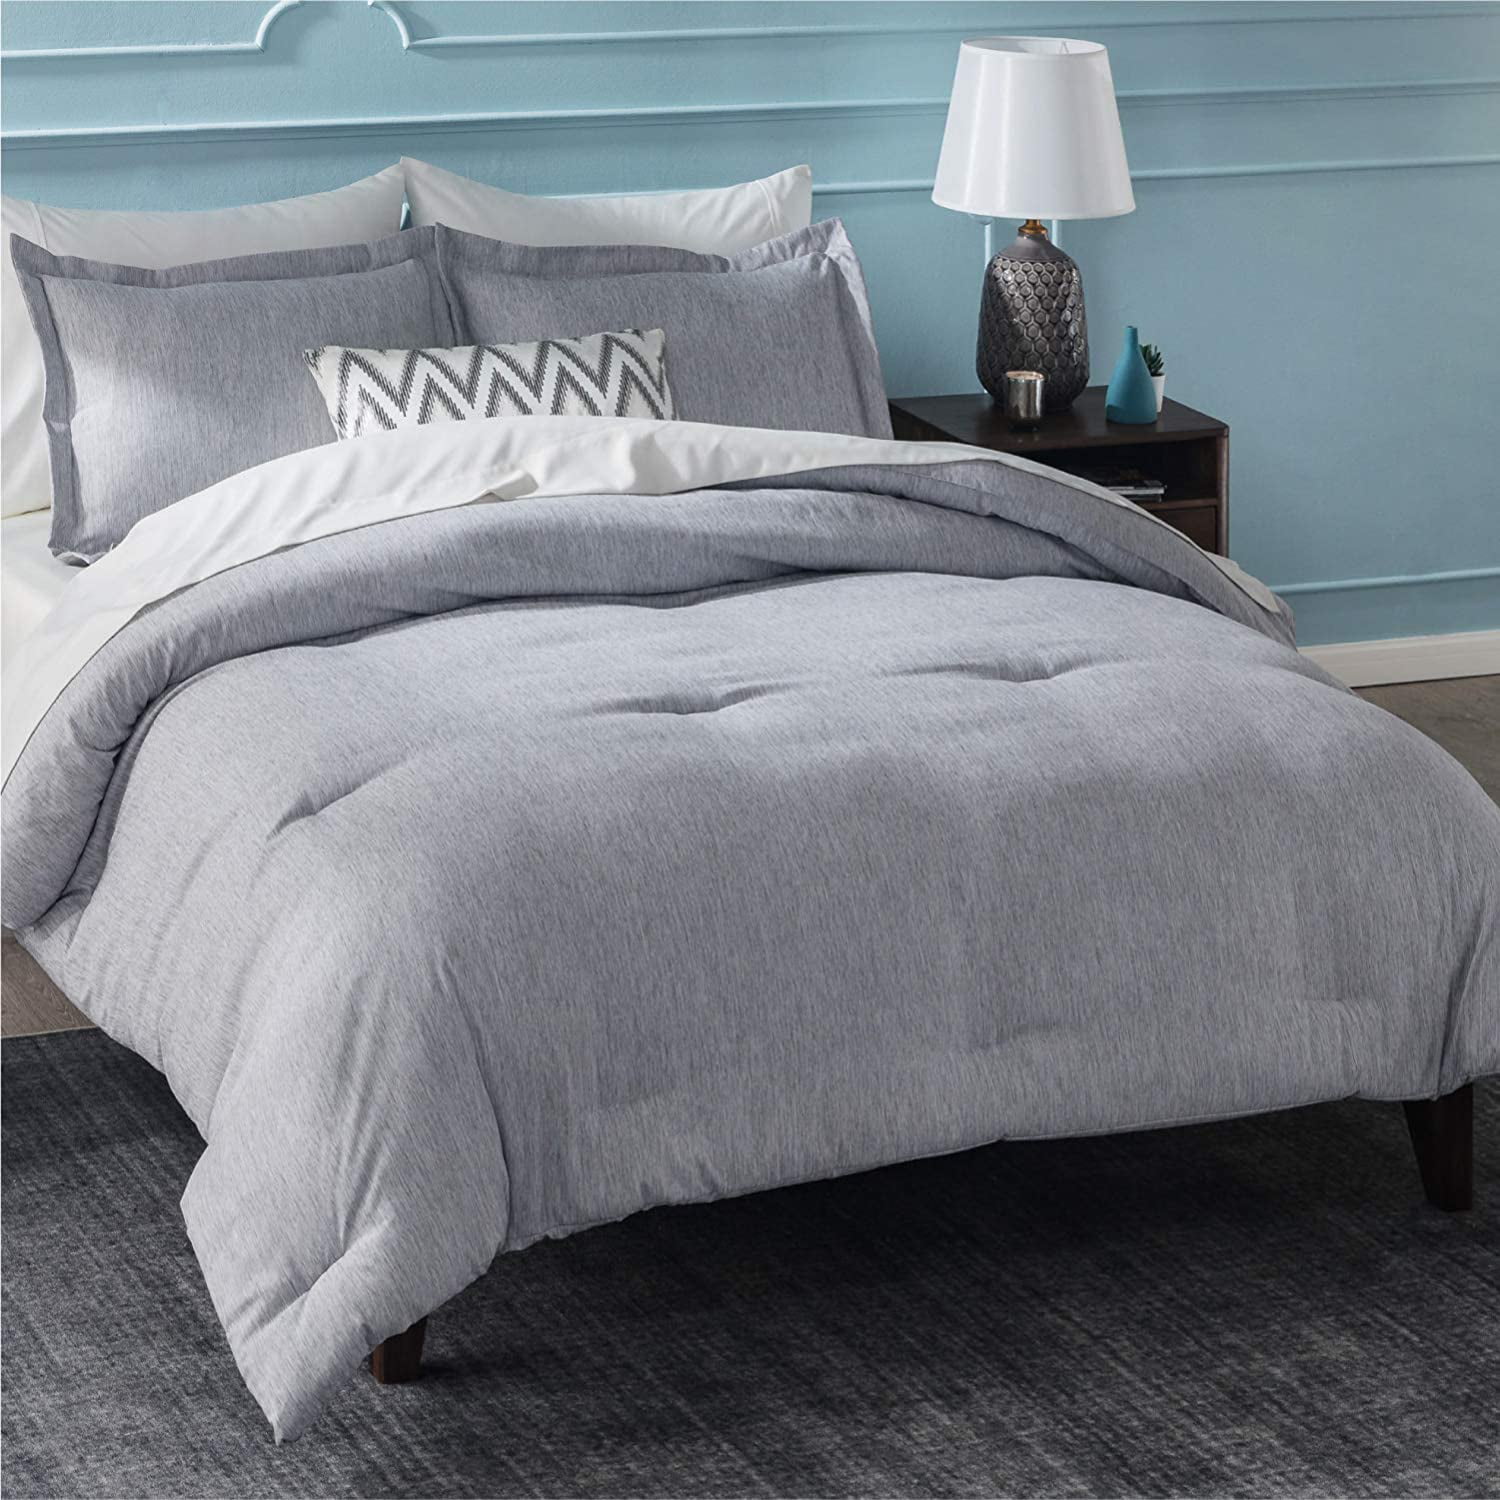 Bedsure California King Comforter Sets, Can You Use King Size Bedding On A California